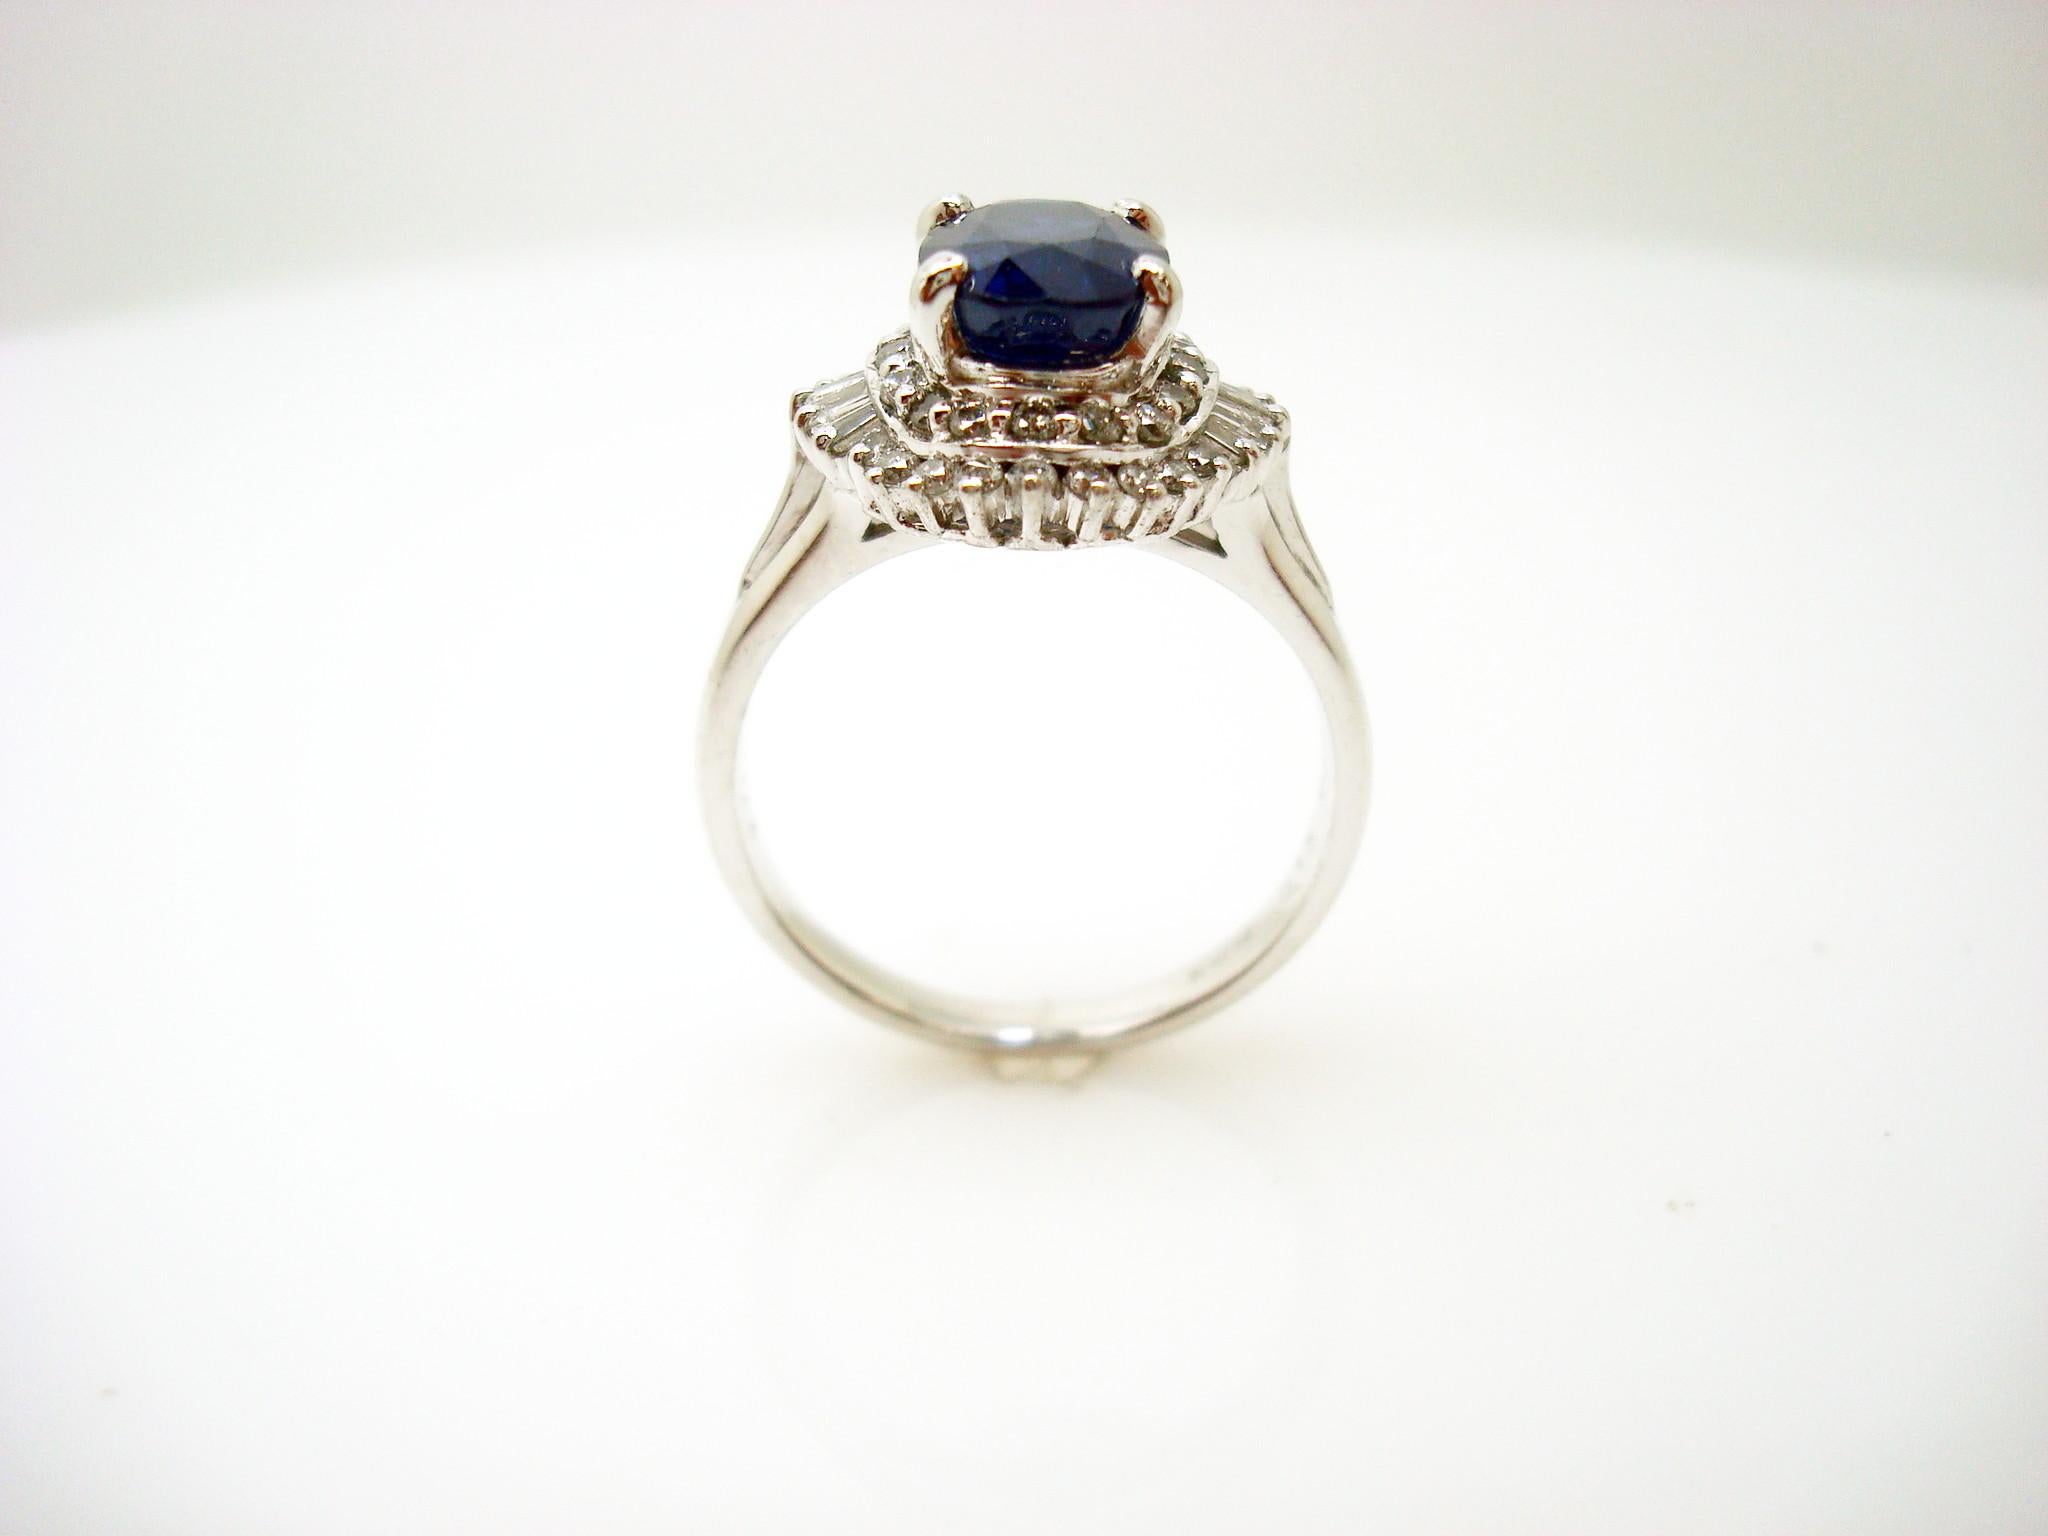 Platinum sapphire and diamond ring featuring a large oval blue sapphire weighing 1.42 carats. The sapphire is accented by .40cts total of round and baguette cut diamonds set in a ballerina style.  The sapphire measures 8.6mm x 6.4mm.  The round